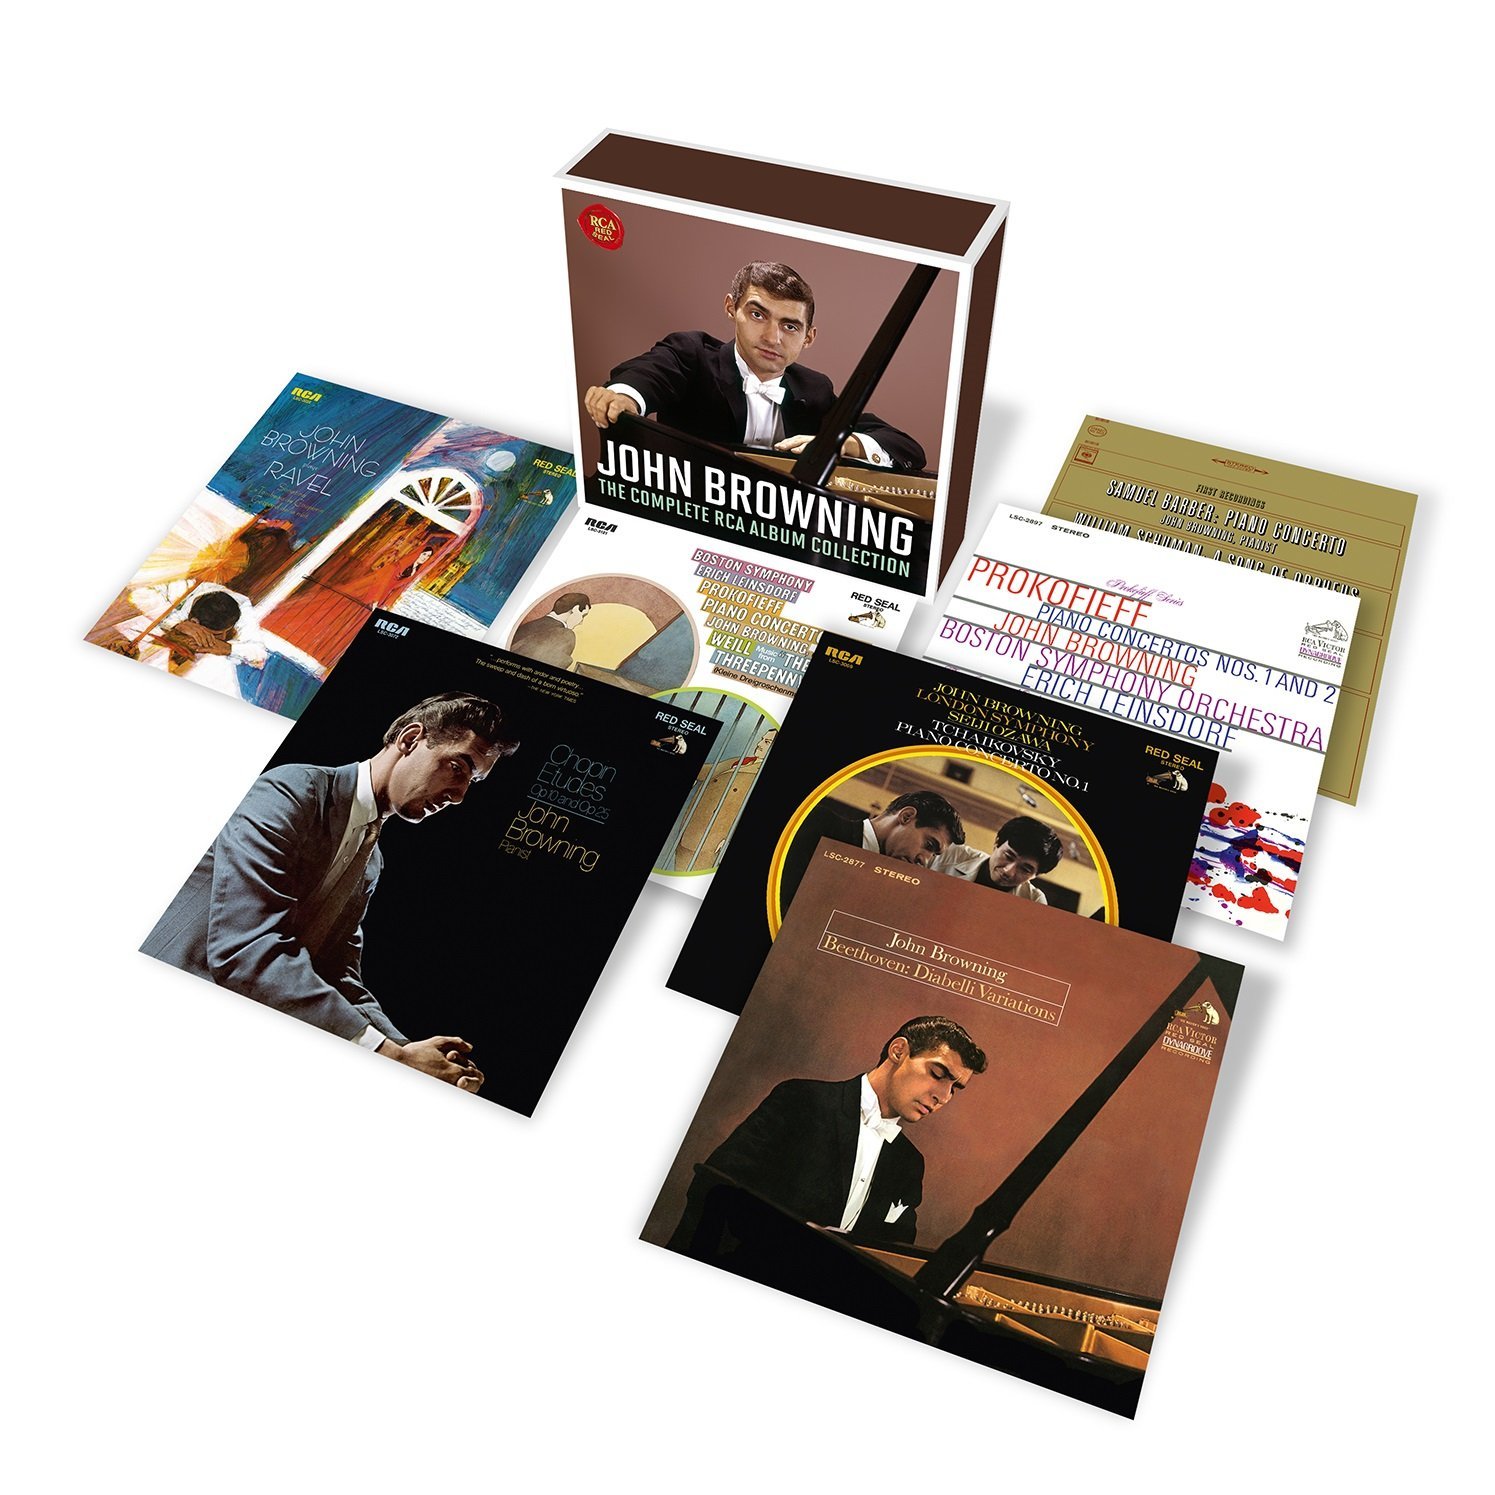 John Browning - The Complete Rca Album Collection Box set | John Browning